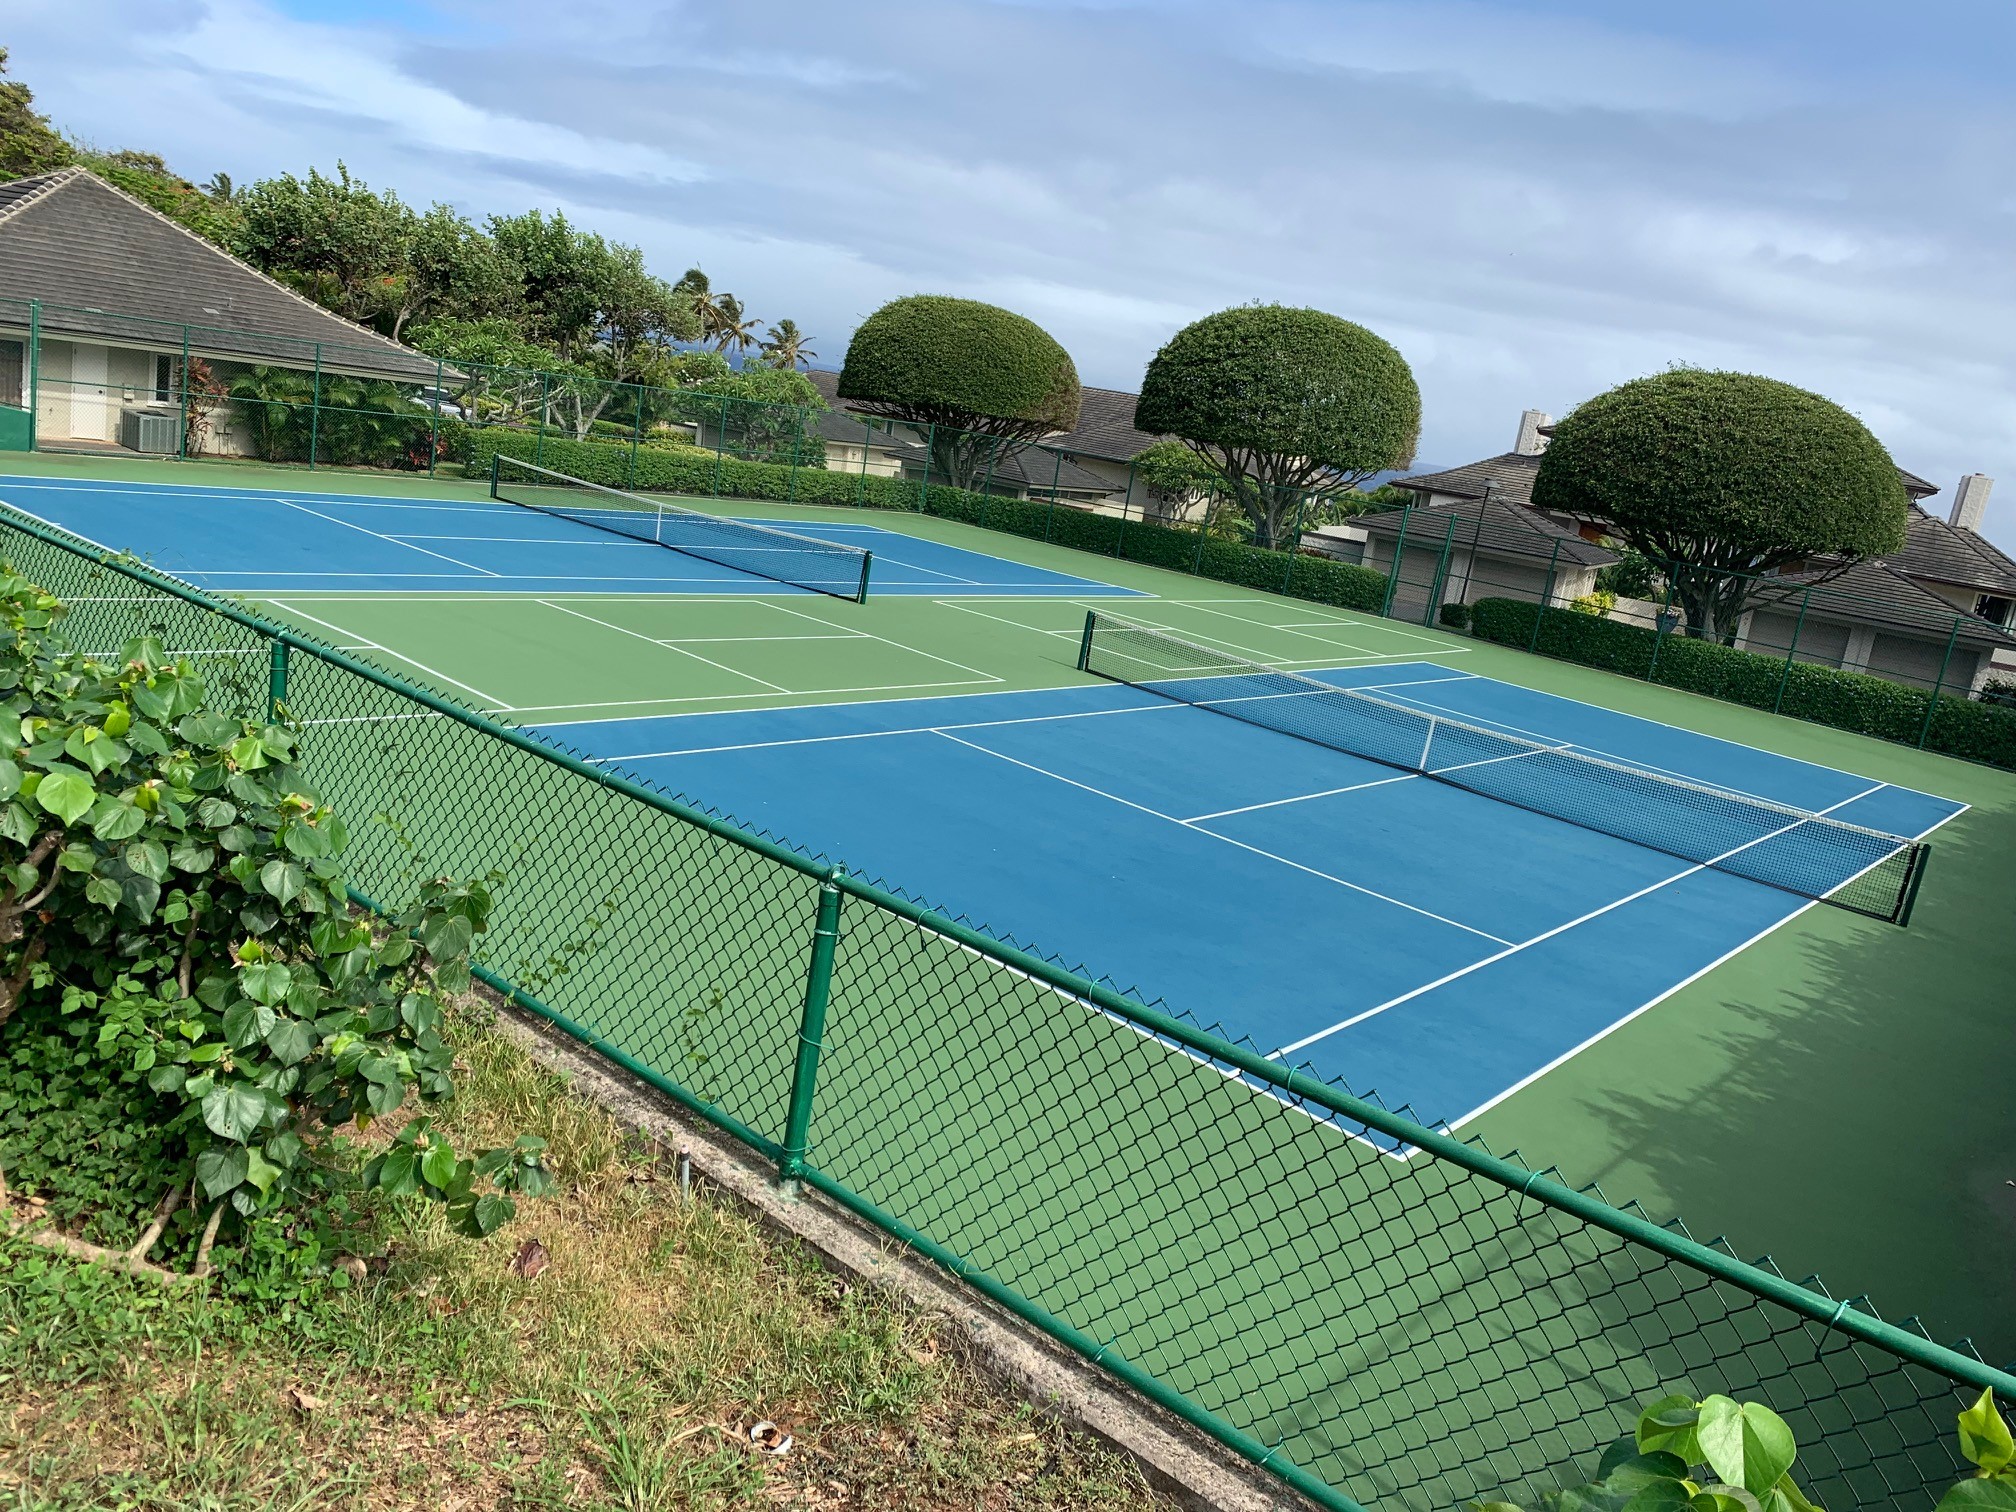 Pickleball Project In Hawaii Showing 2 Pb Courts In The Middle Of 2 Tennis Courts 5.15.19